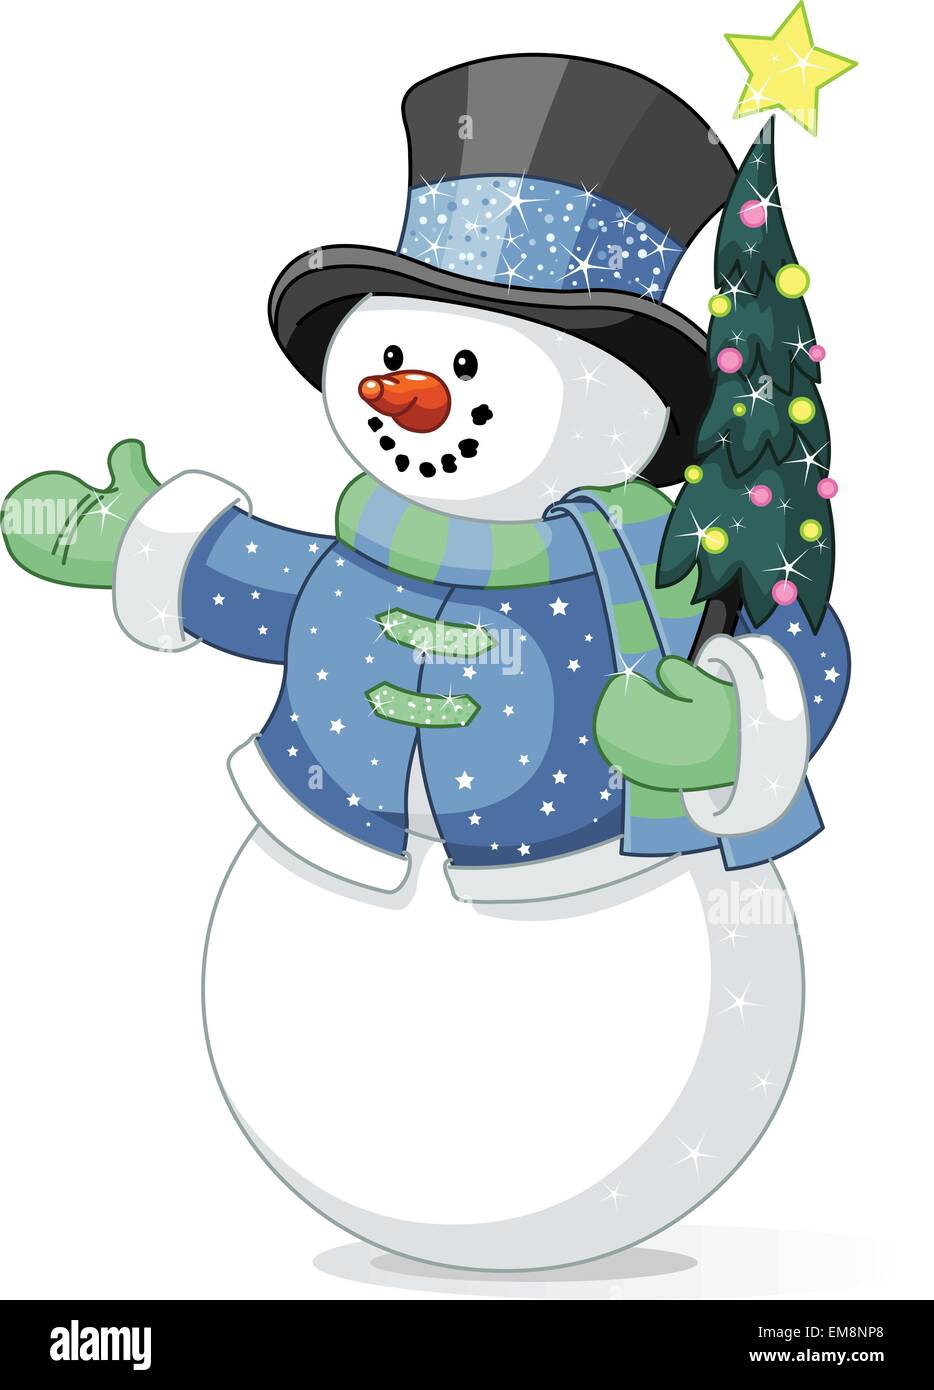 Snowman with Christmas tree Stock Vector